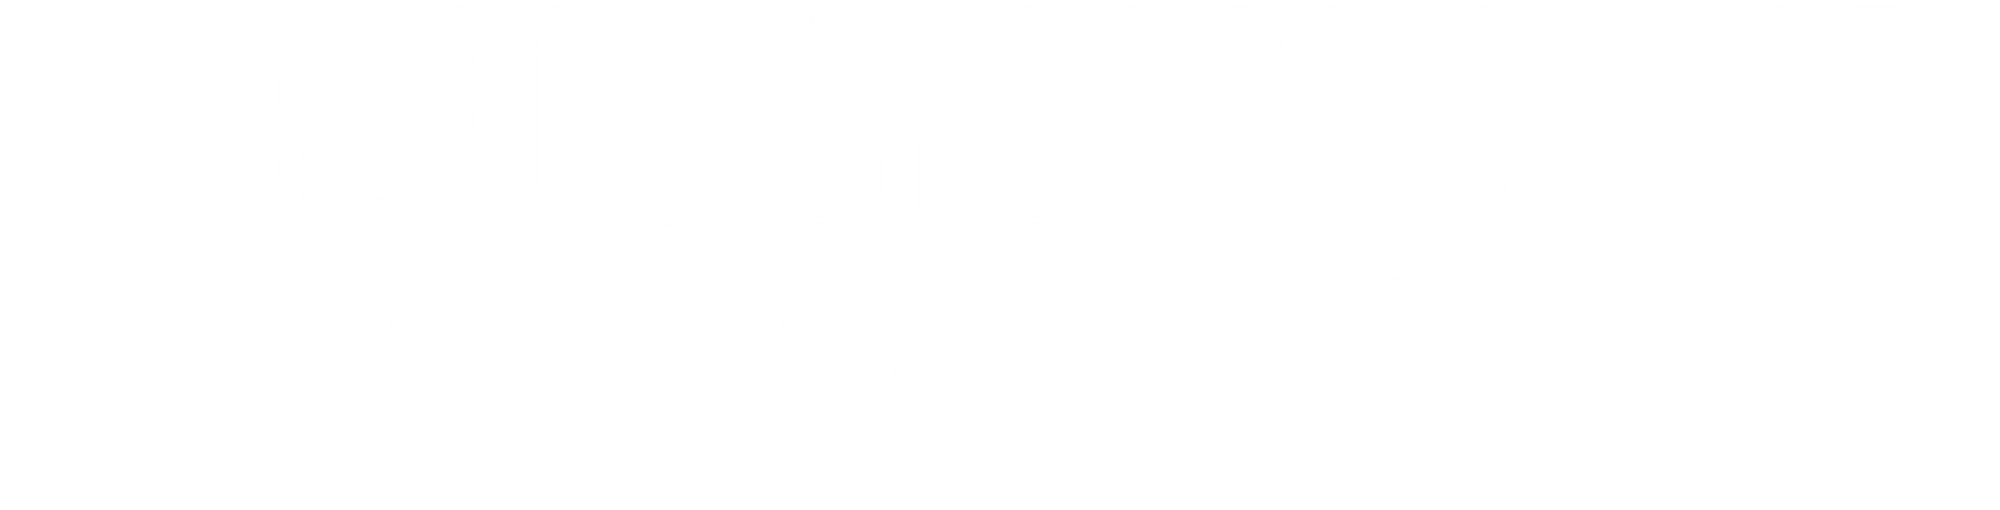 And Just Like That… The Documentary logo